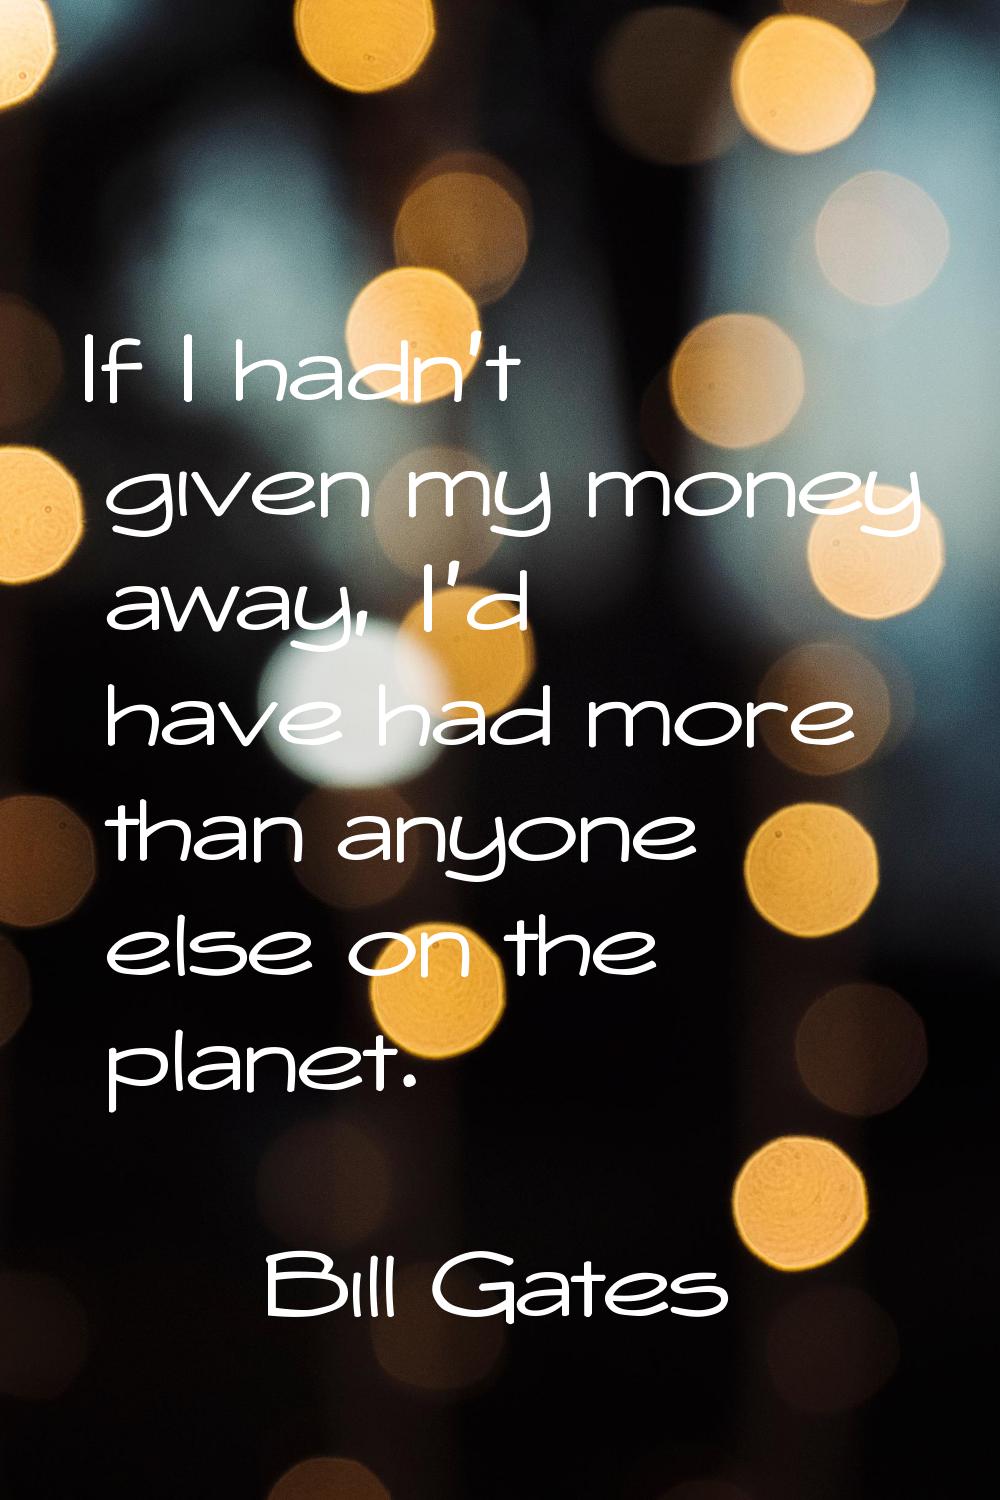 If I hadn't given my money away, I'd have had more than anyone else on the planet.